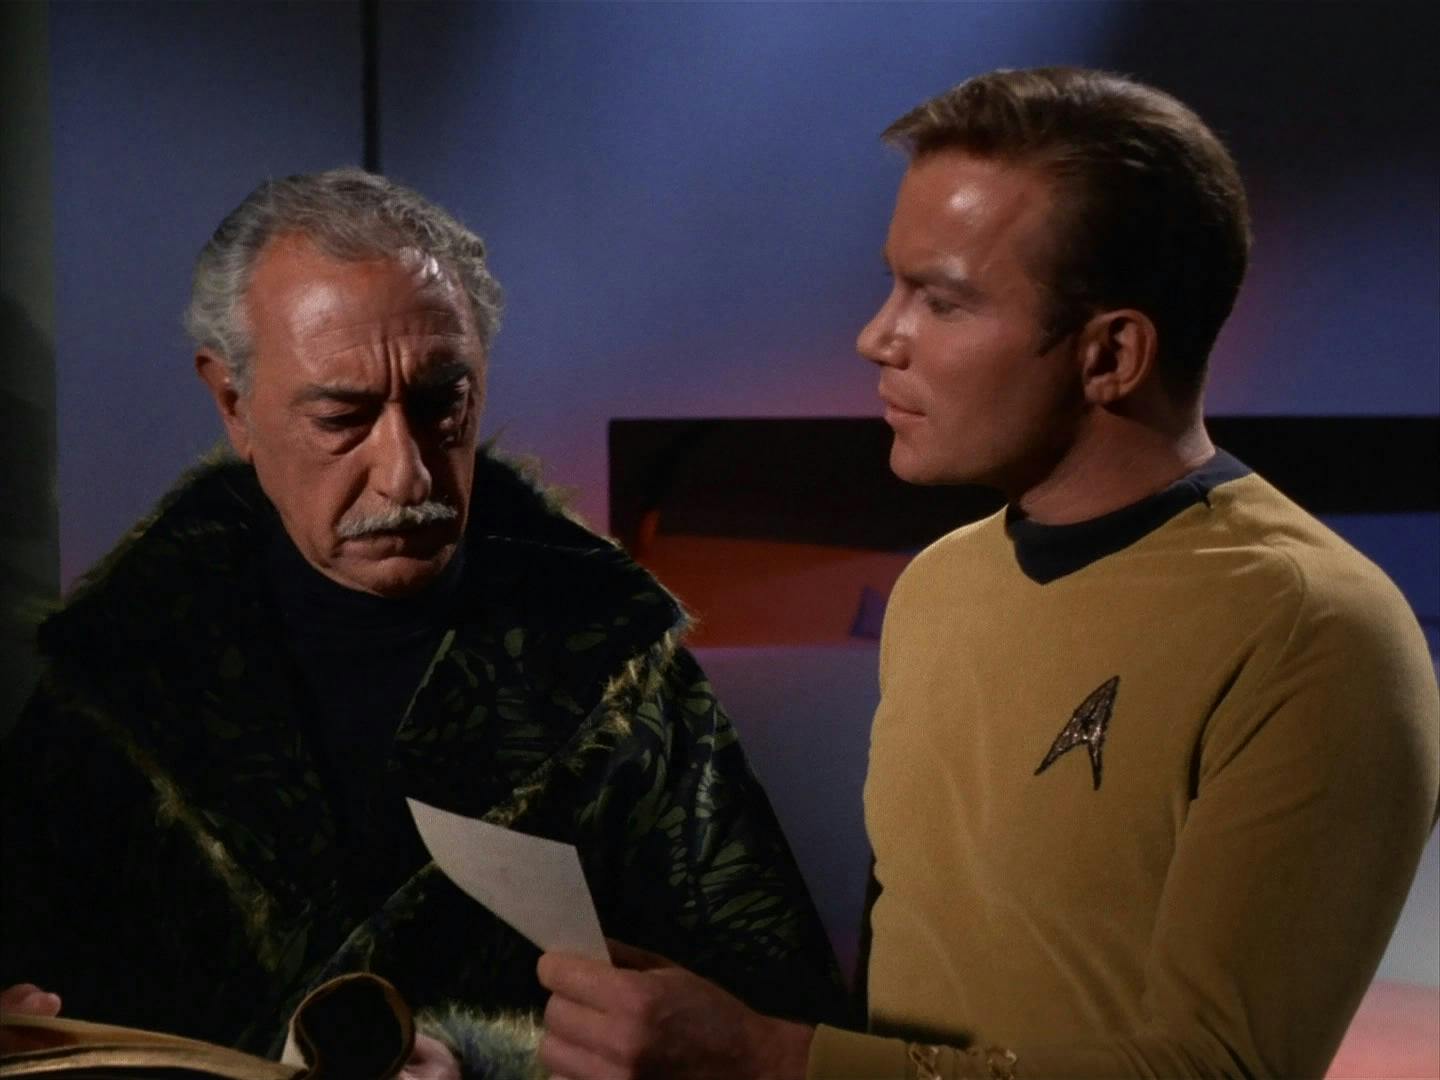 Captain Kirk (The Original Series) stands next to Kodos, and holds out a piece of paper to him.